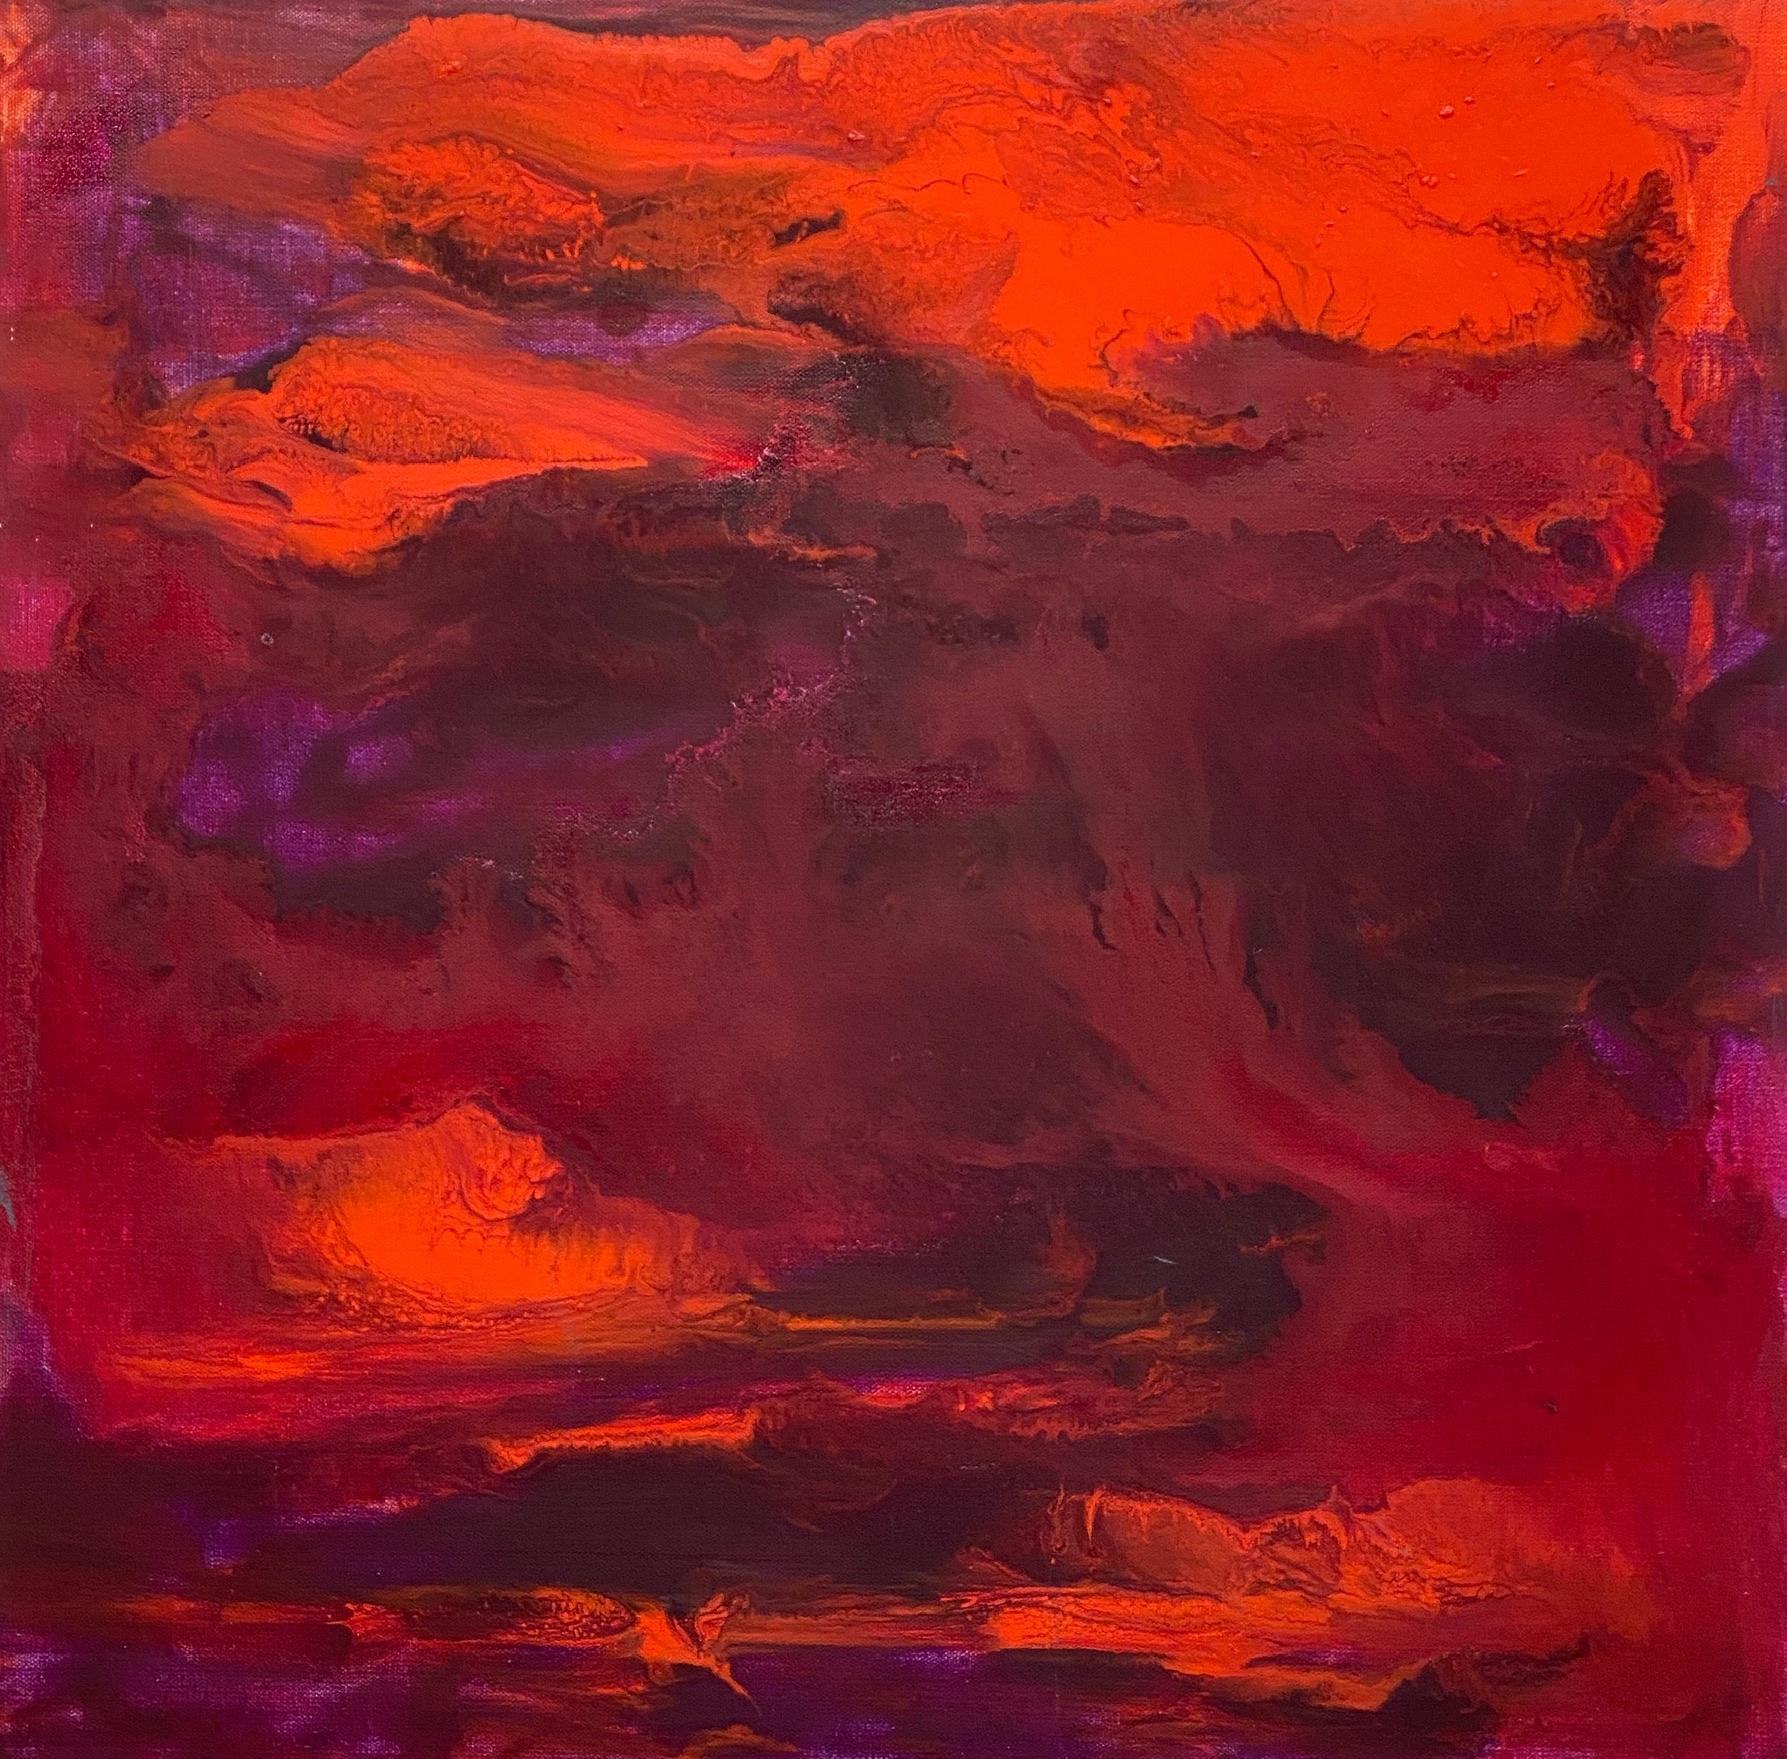 Sailor's delight, Contemporary painting with bold reds, oranges and violets 6